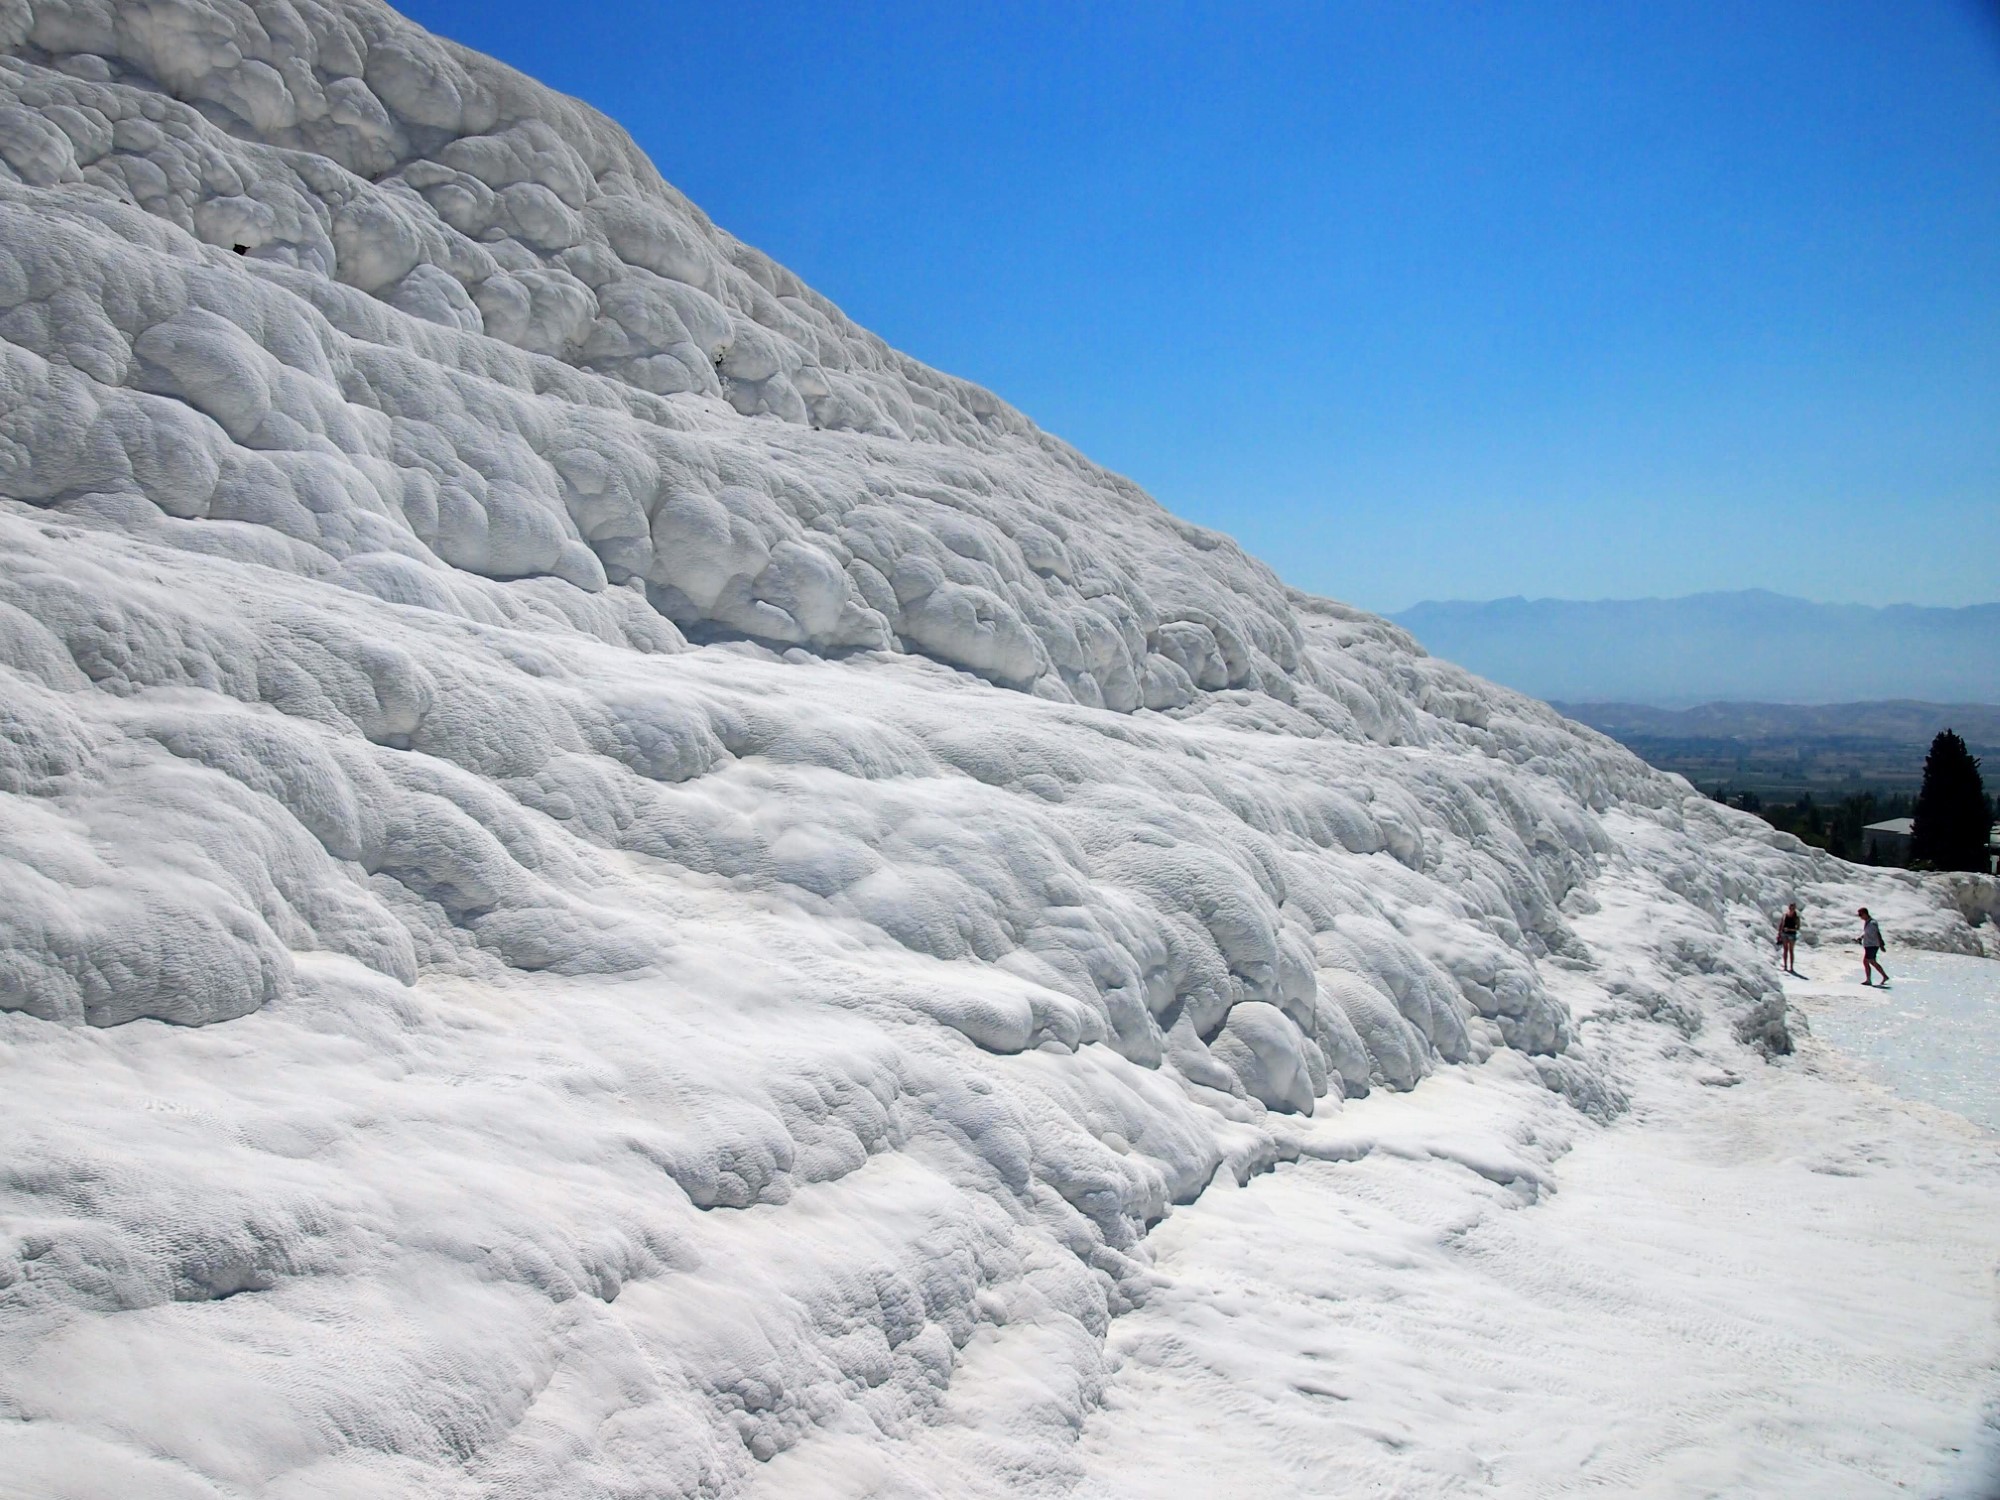 Large slope of snow-like white travertine at Pamukkale, with two people in the middle distance